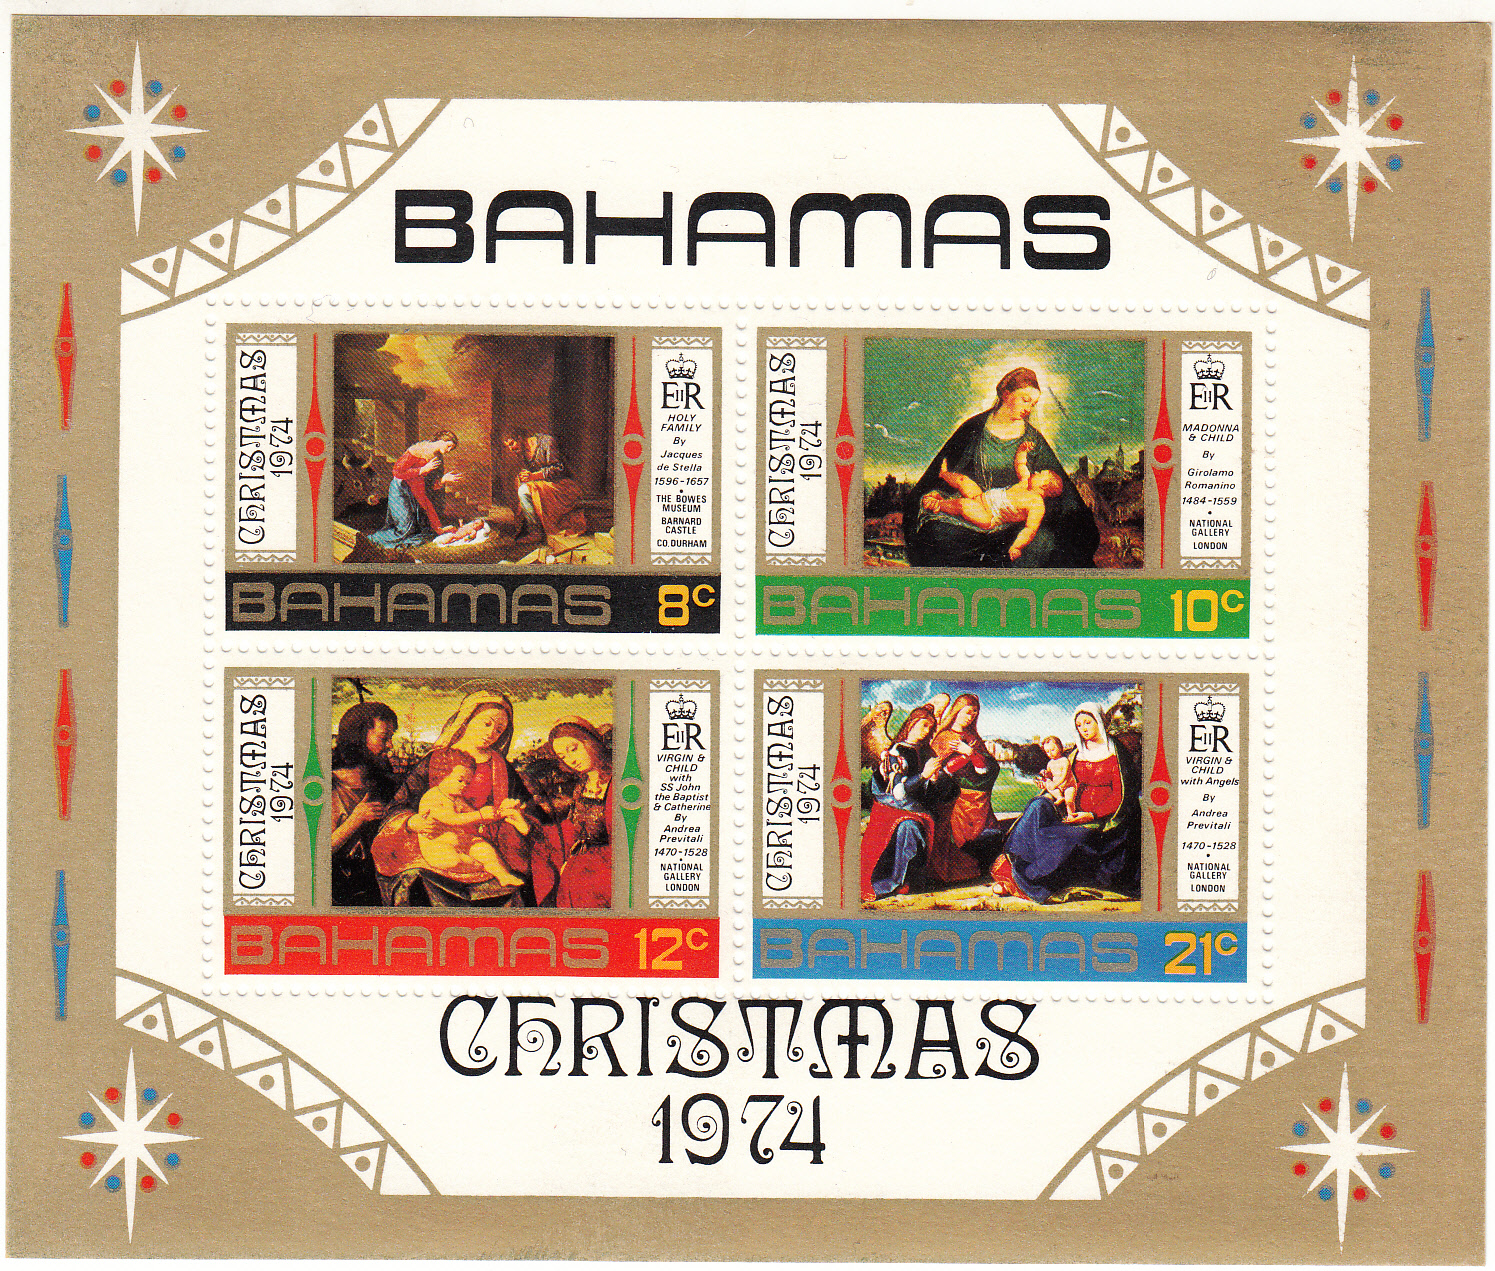 Bahamas 1973 NATALE BF 4 Val. Pitture Religiose Vergine